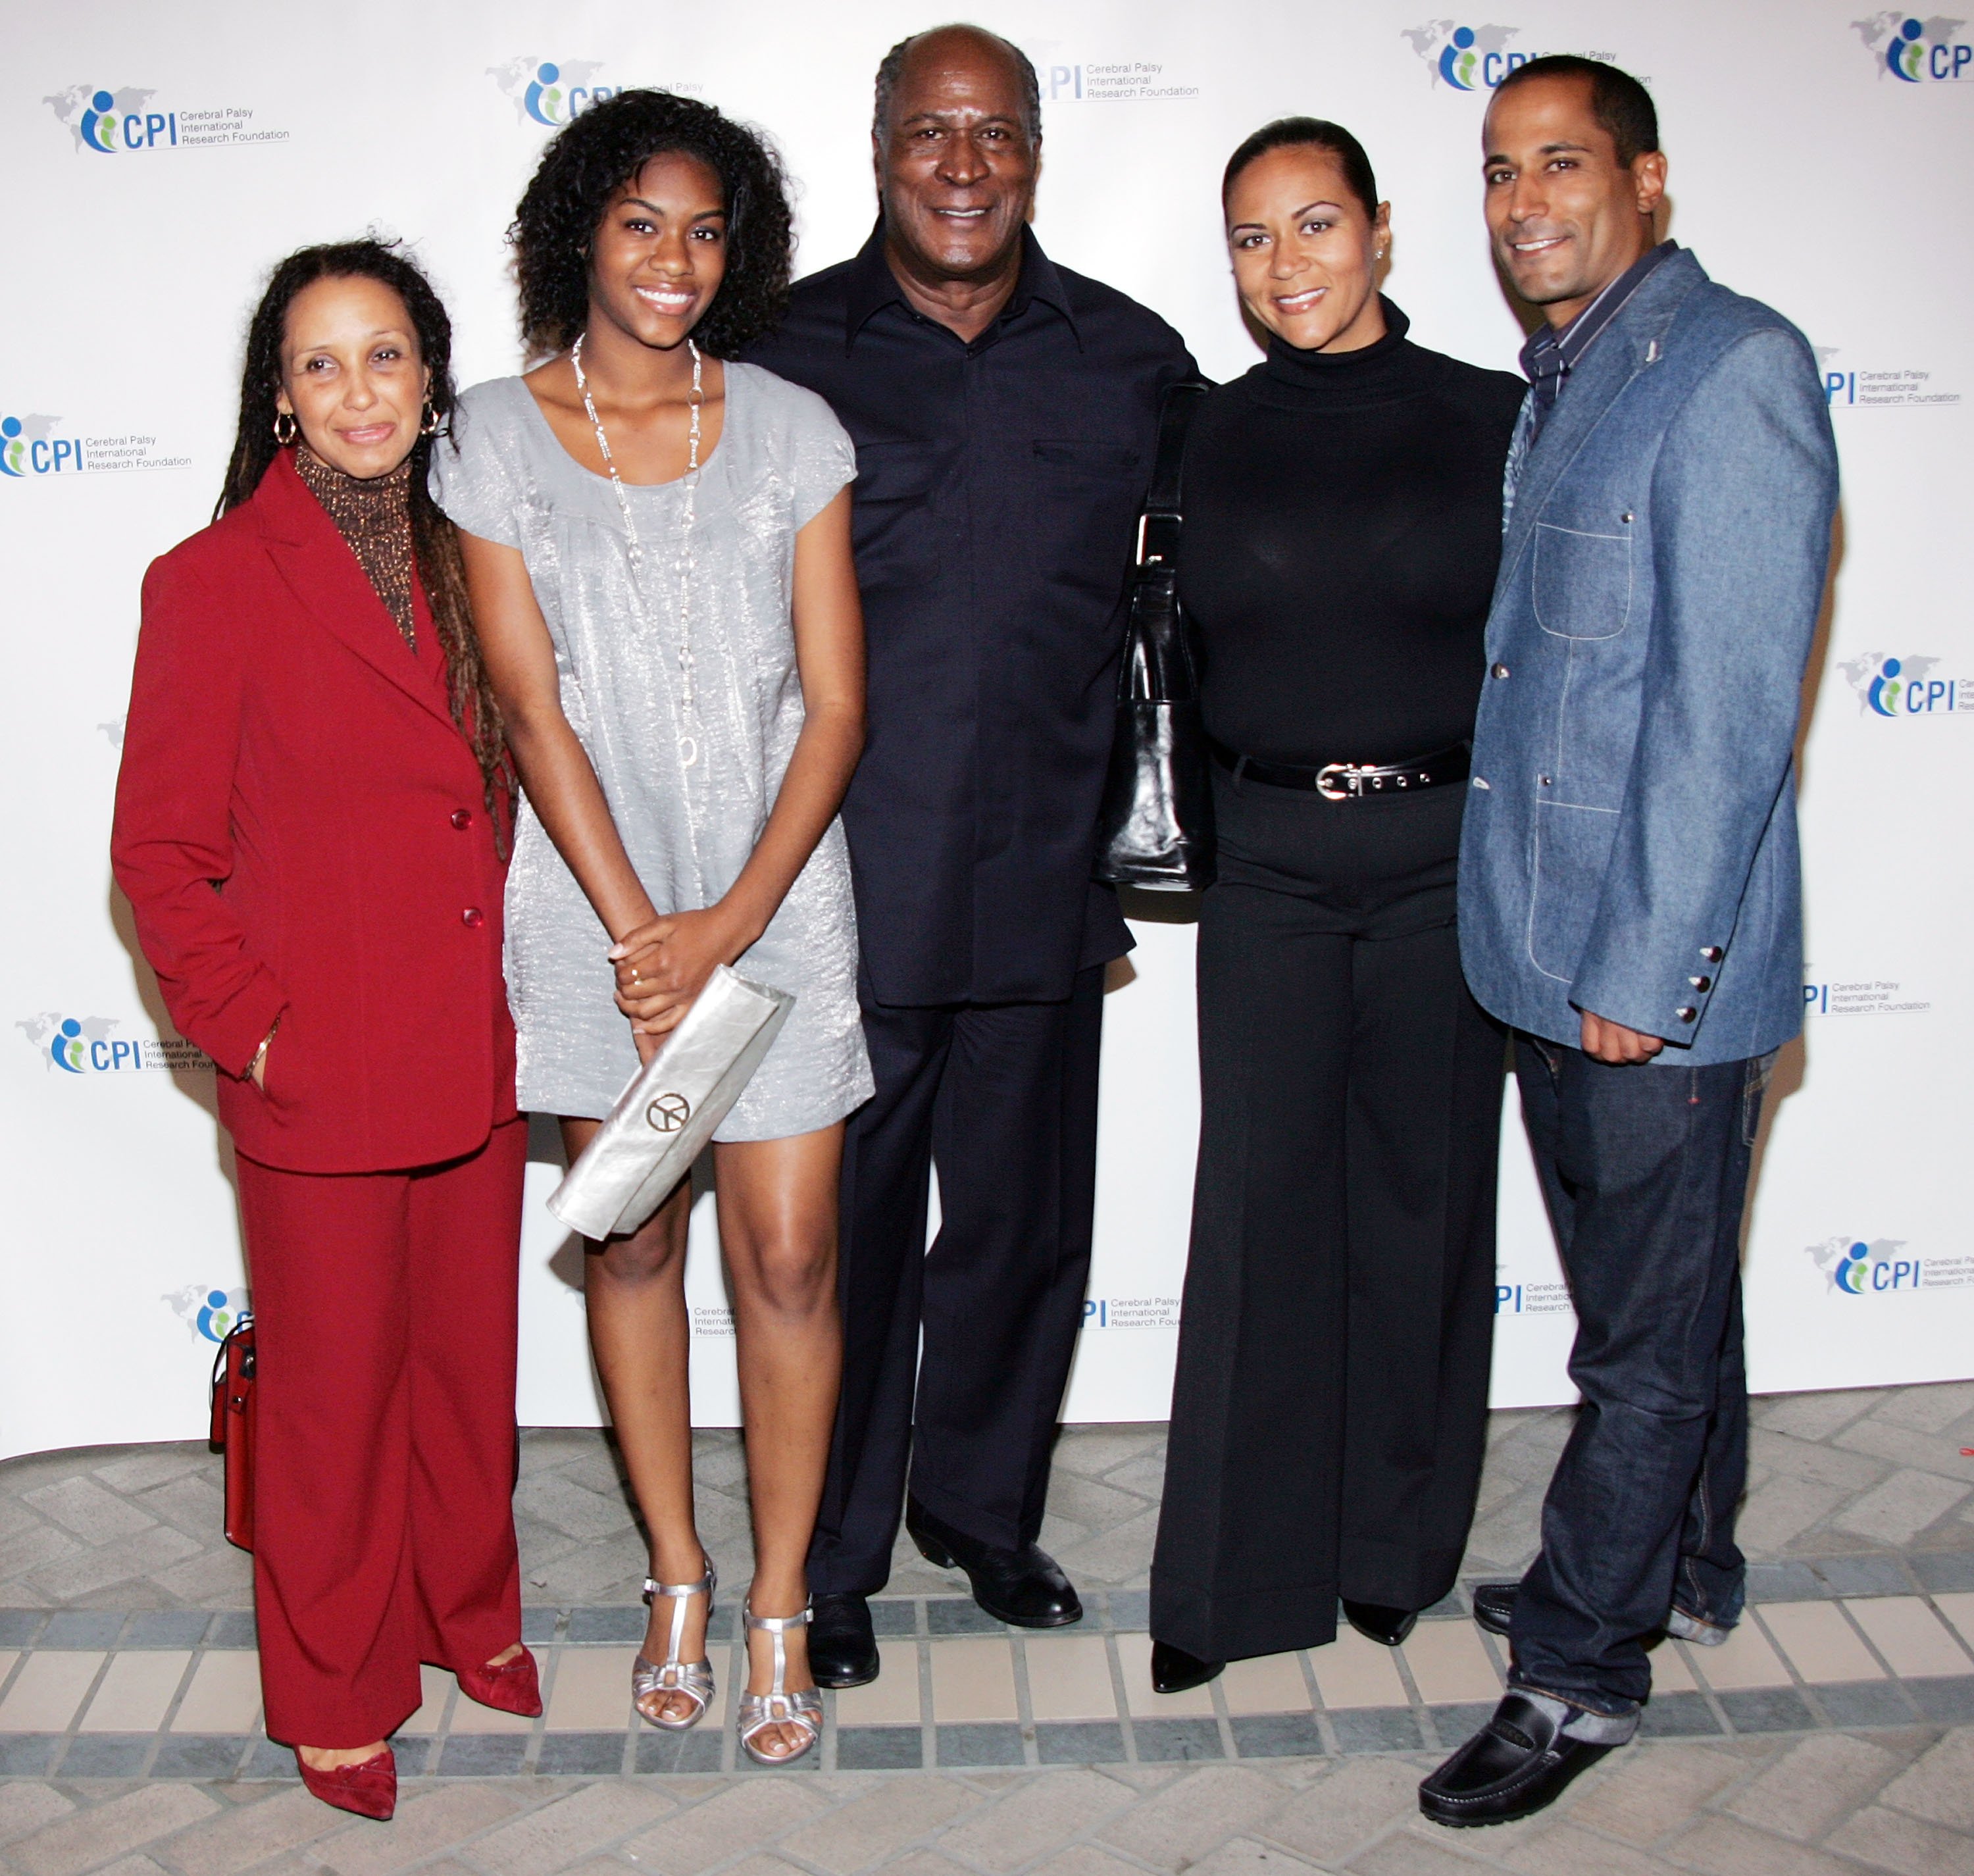 John Amos, Shannon Amos, K.C. Amos and friends in Los Angeles, California on December 3, 2008. | Photo: Getty Images